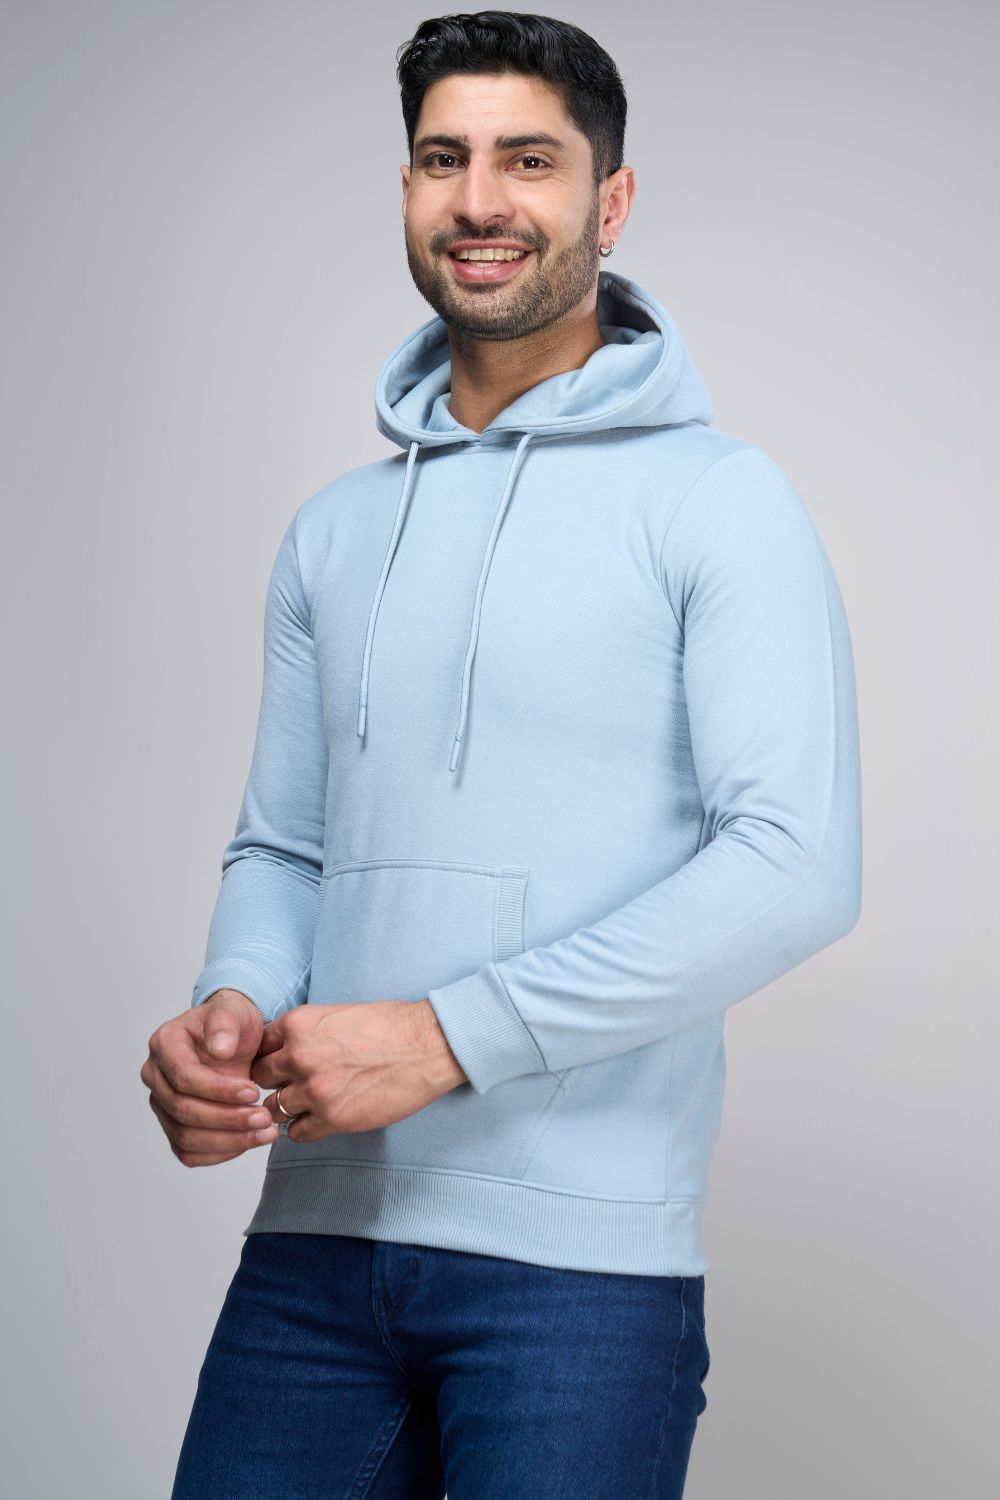 A model wearing Shenghayo Blue colored, hoodie for men with full sleeves and relaxed fit.